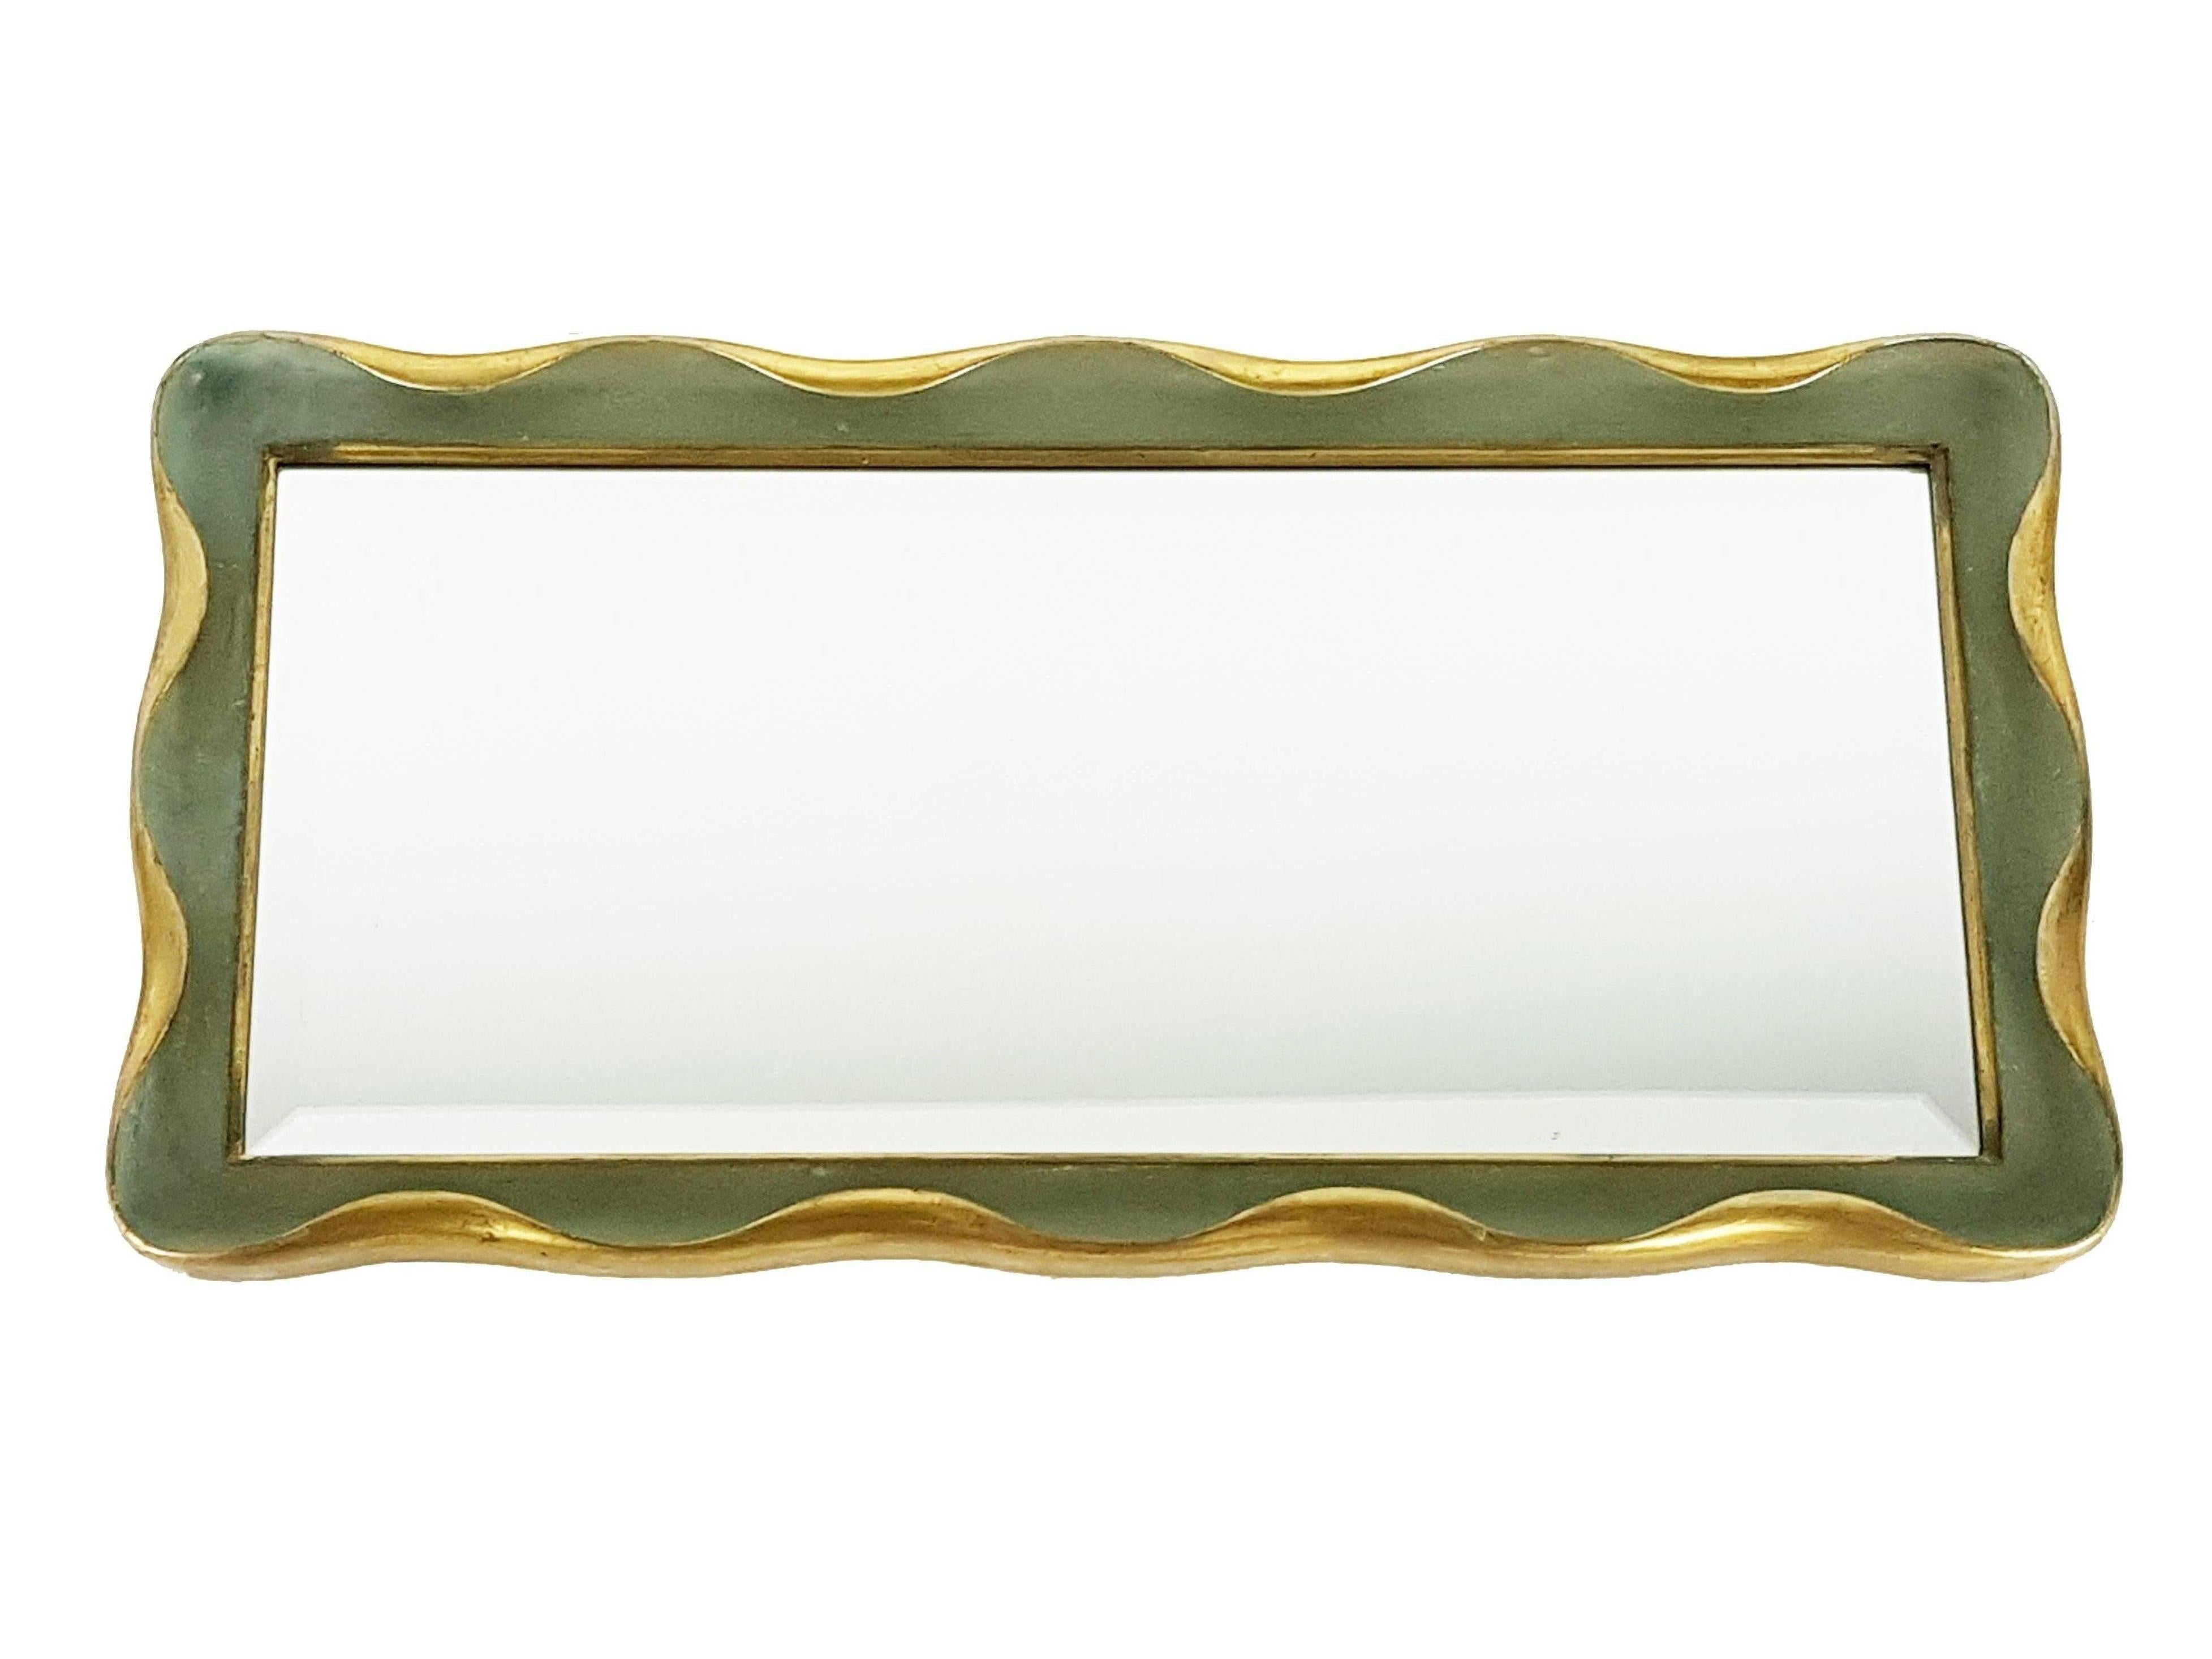 This wall mirror is made from a laquered and golden wood frame with a faceted mirrored glass. It can be used both horizontal and vertical orientation. Its design and its fine quality resembles similar works of Giovanni Gariboldi from the 1940s. Very